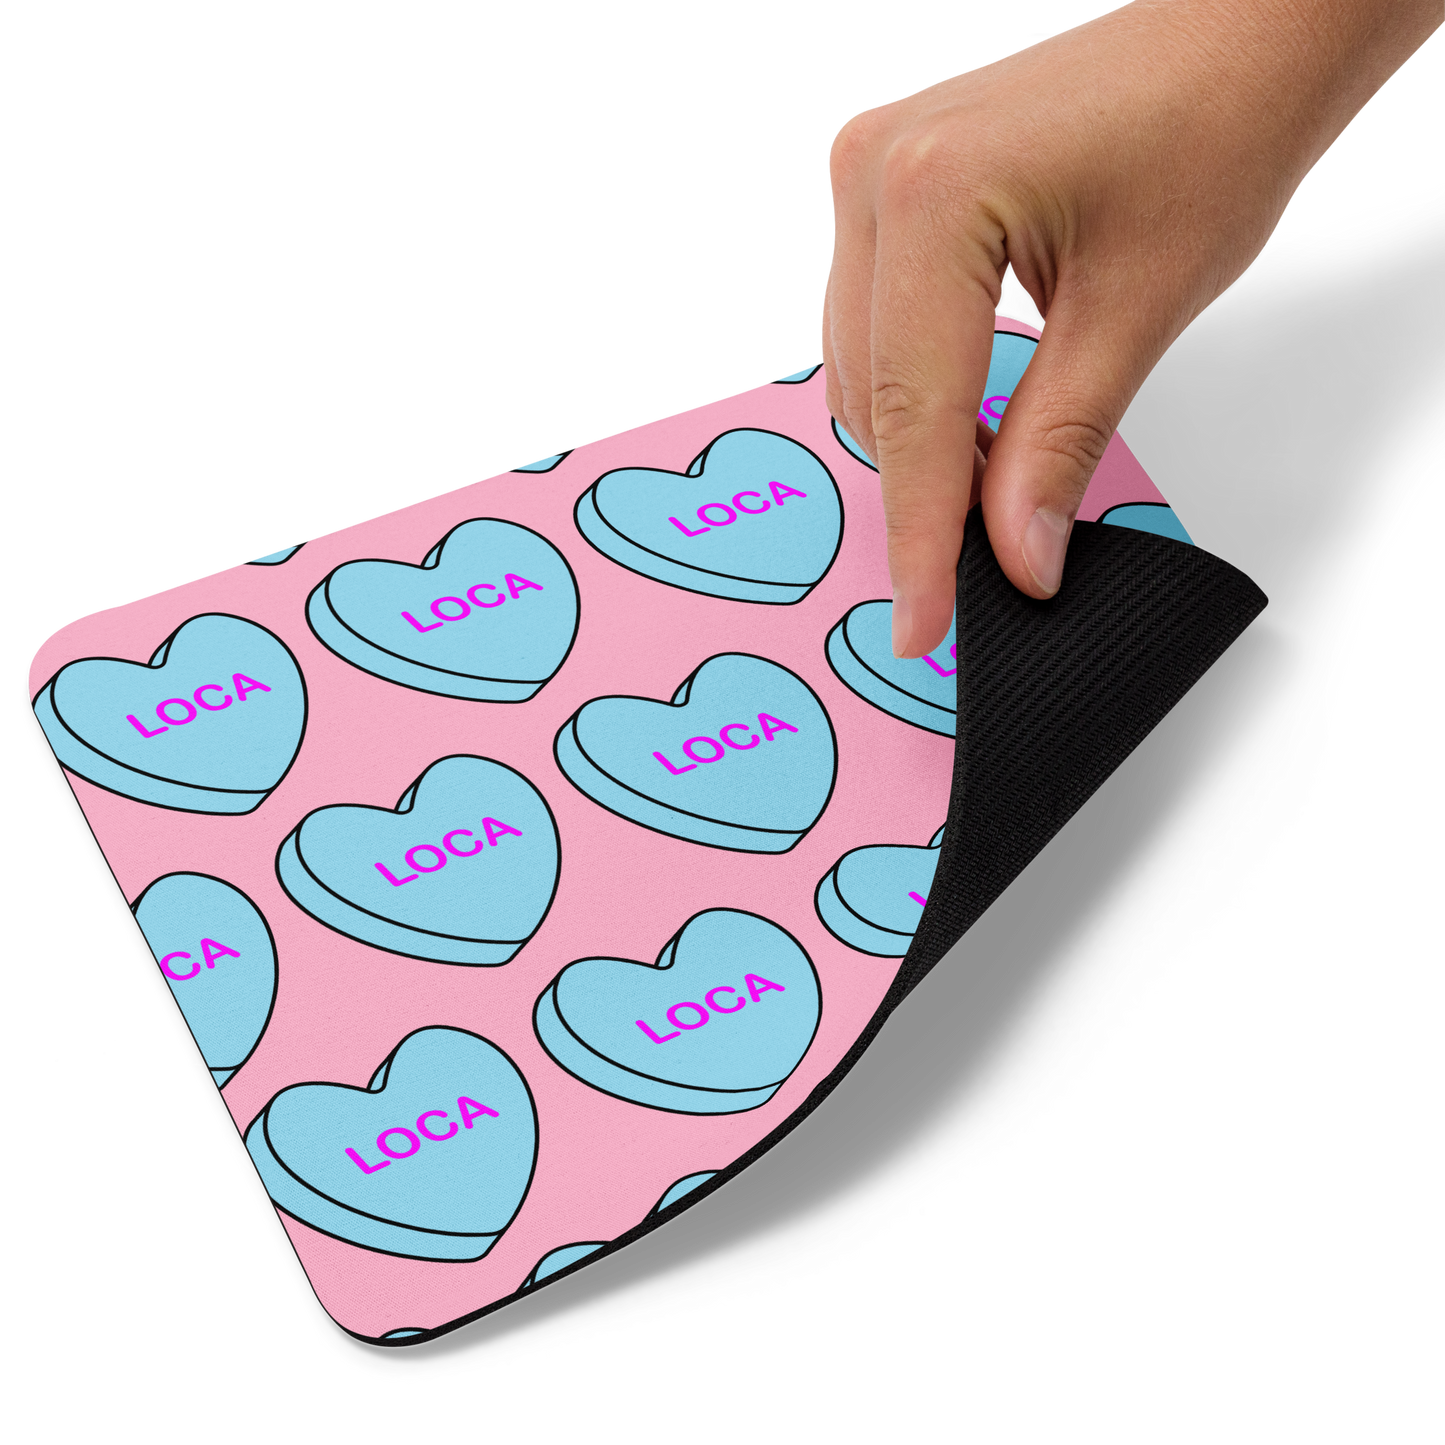 Loca Candy Conversation Heart - Mouse pad